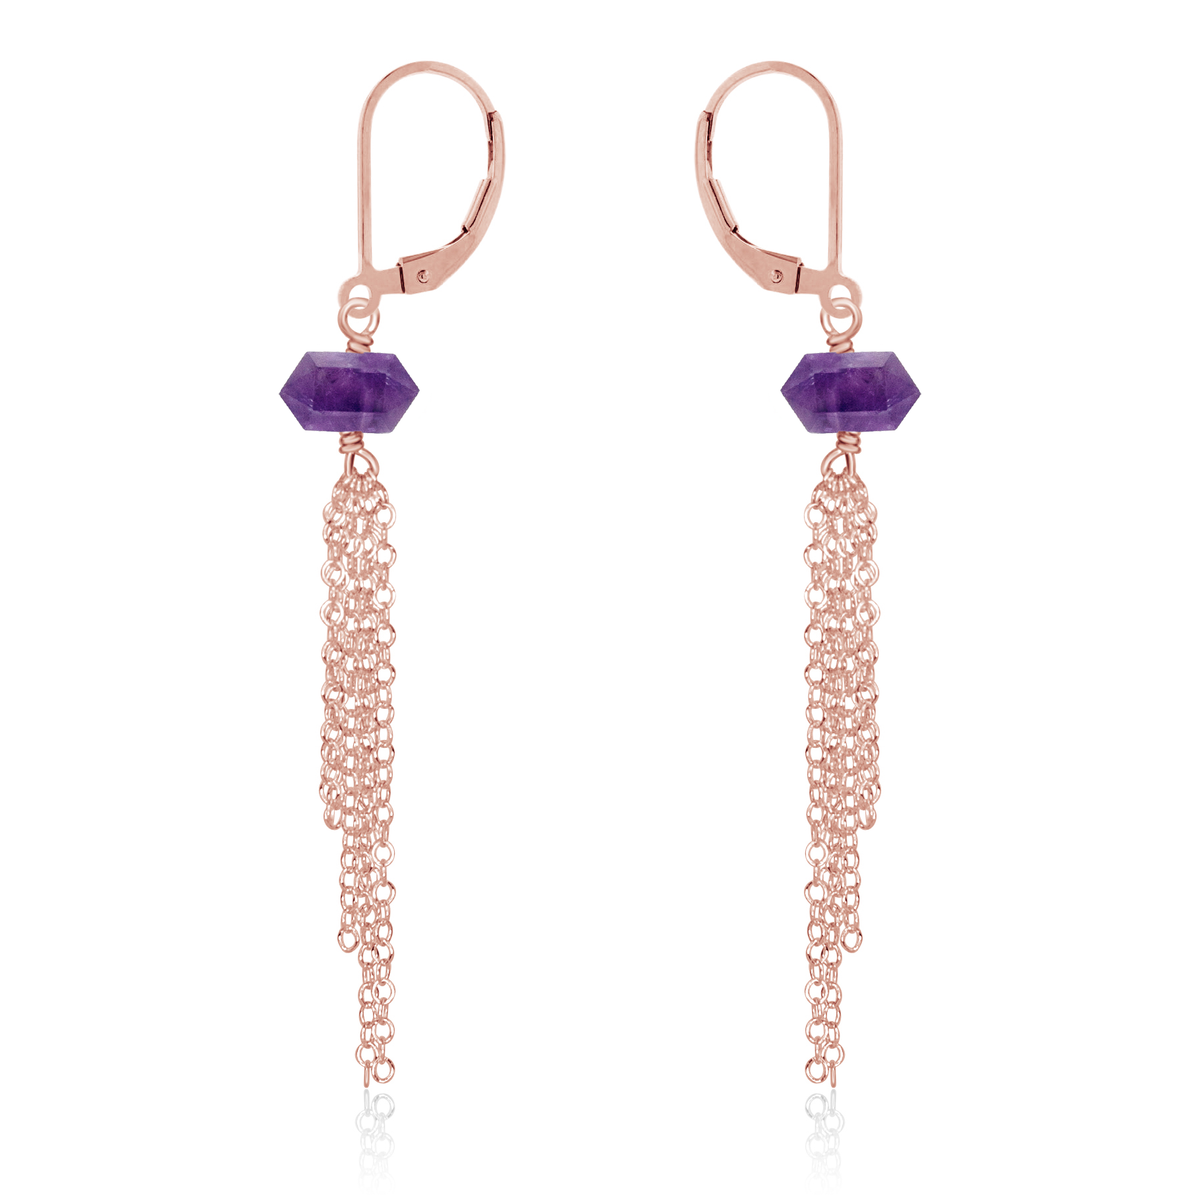 Amethyst Double Terminated Crystal Point Tassel Earrings - Amethyst Double Terminated Crystal Point Tassel Earrings - 14k Rose Gold Fill - Luna Tide Handmade Crystal Jewellery